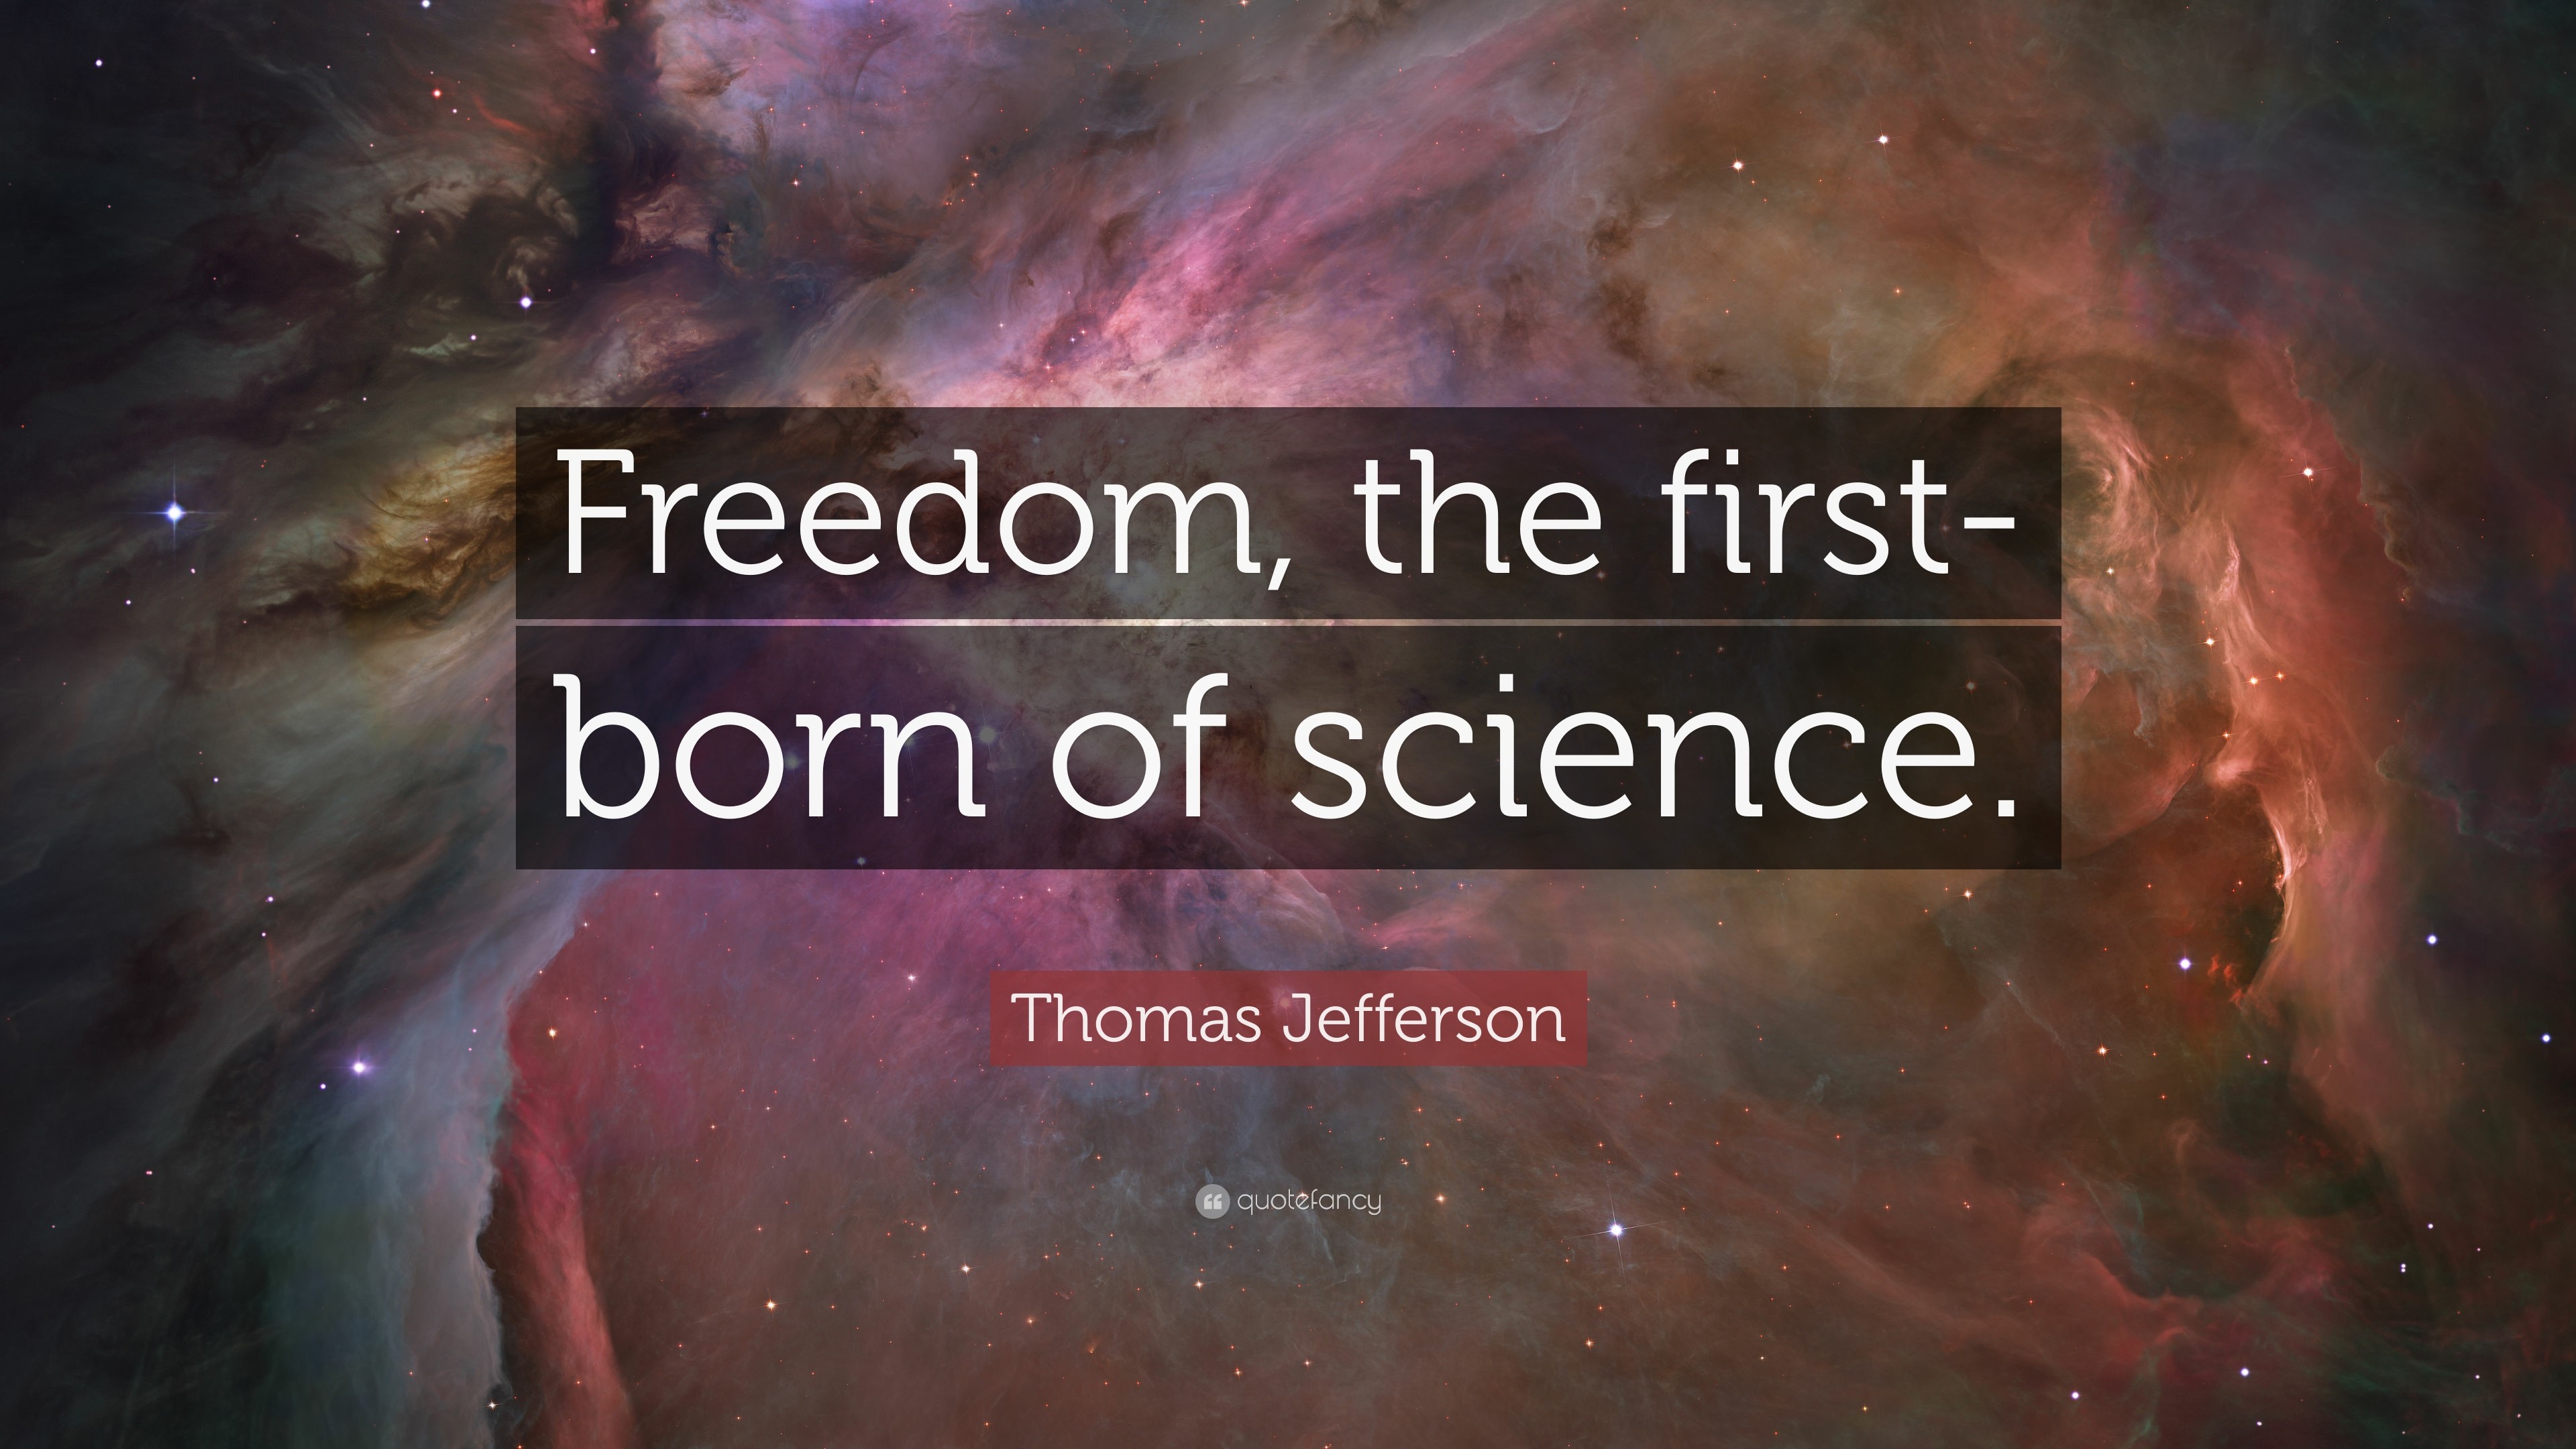 3840x2160 Thomas Jefferson Quote: “Freedom, the first-born of science.”